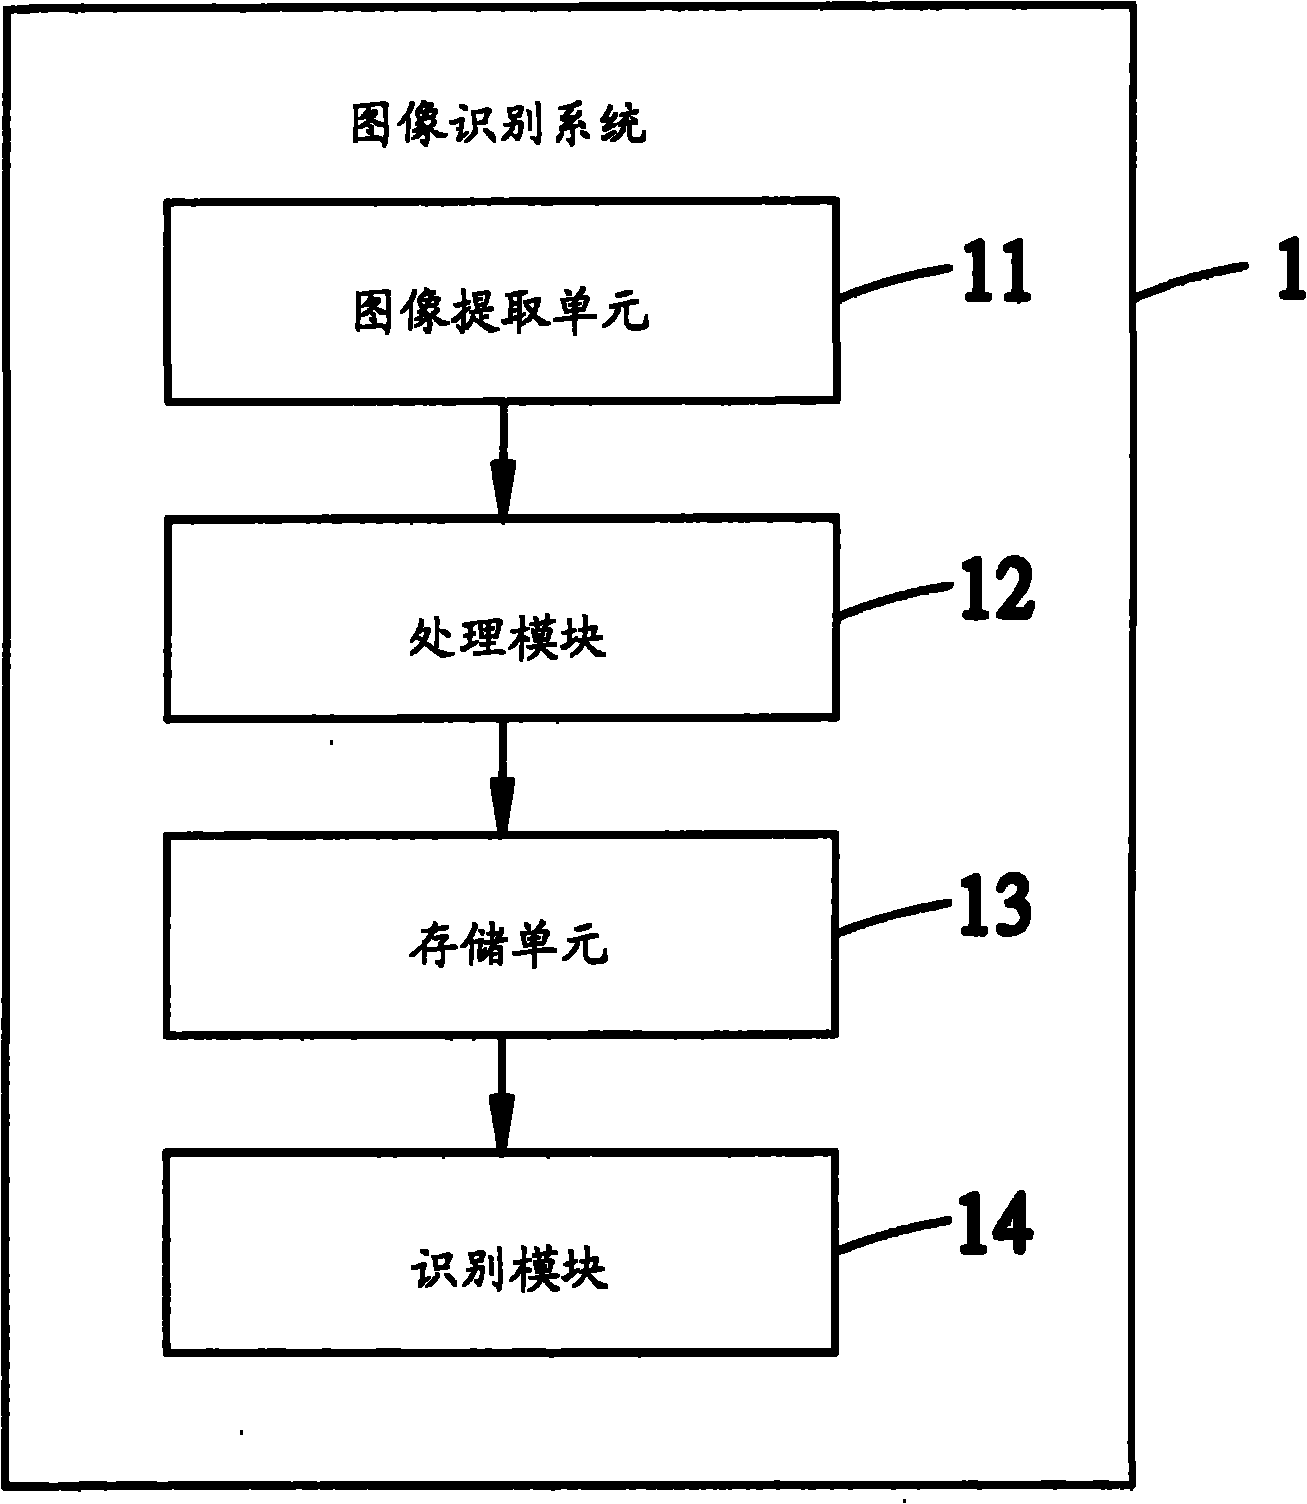 Image identification system and method